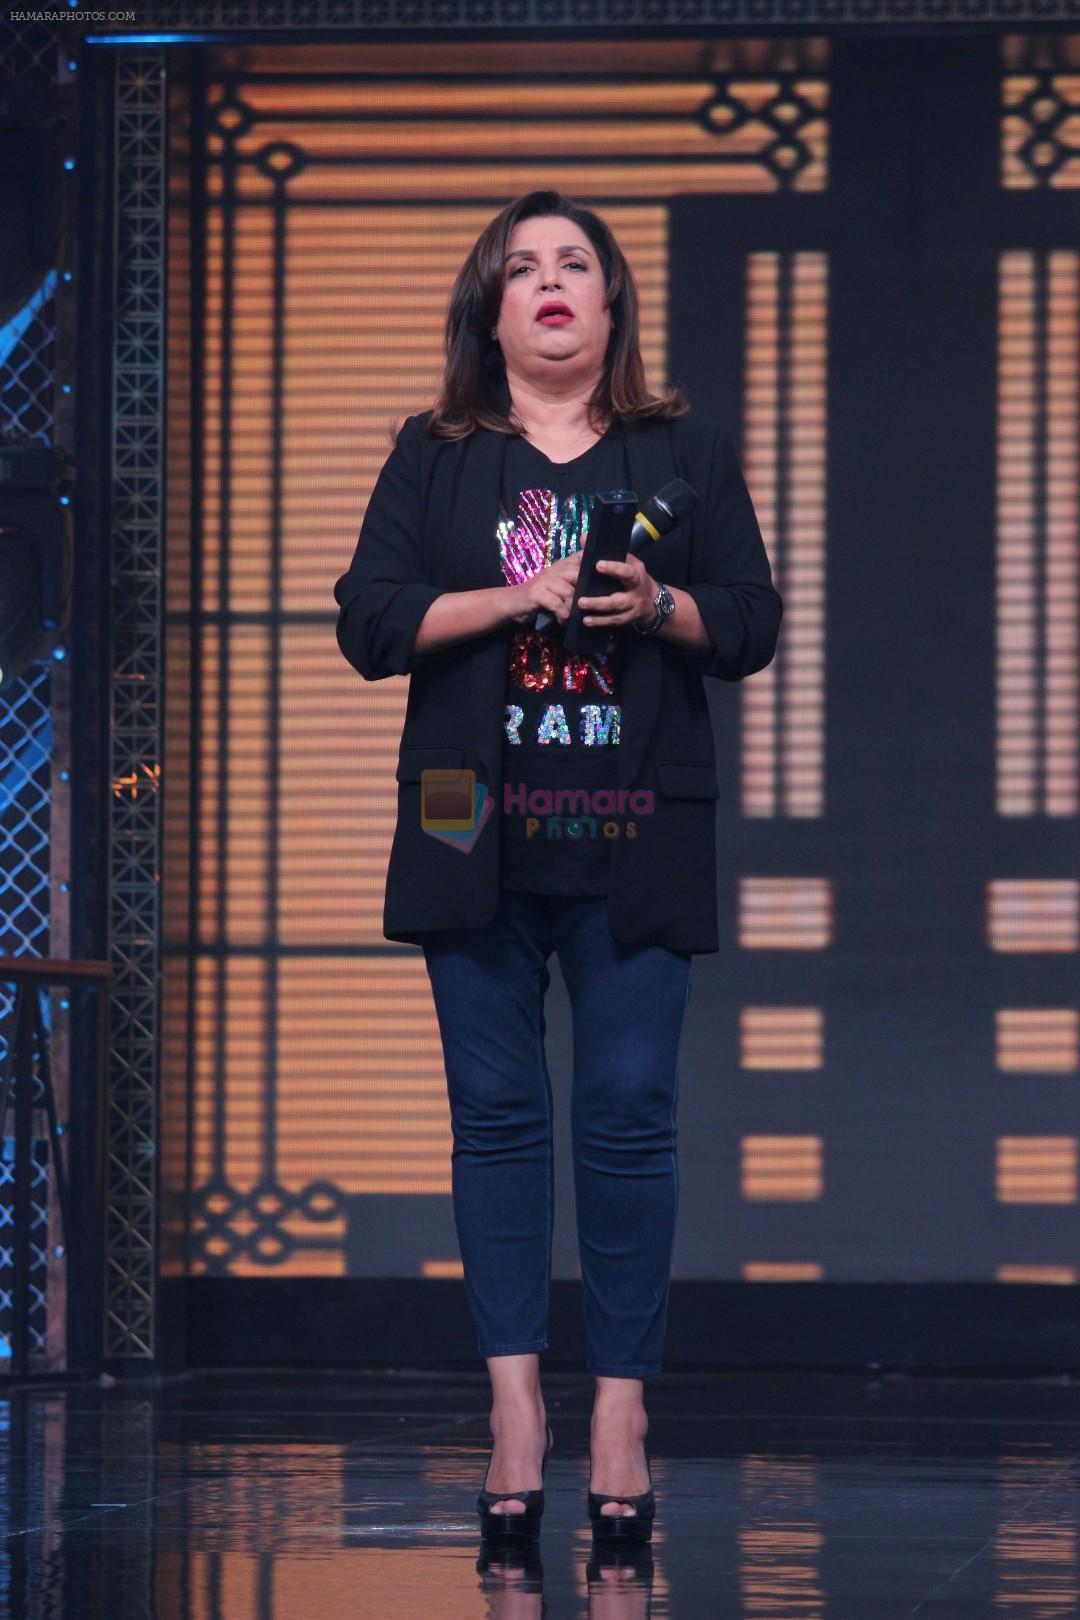 Farah Khan at the press conference of Star Plus Show Lip Sing Battle on 7th Sept 2017